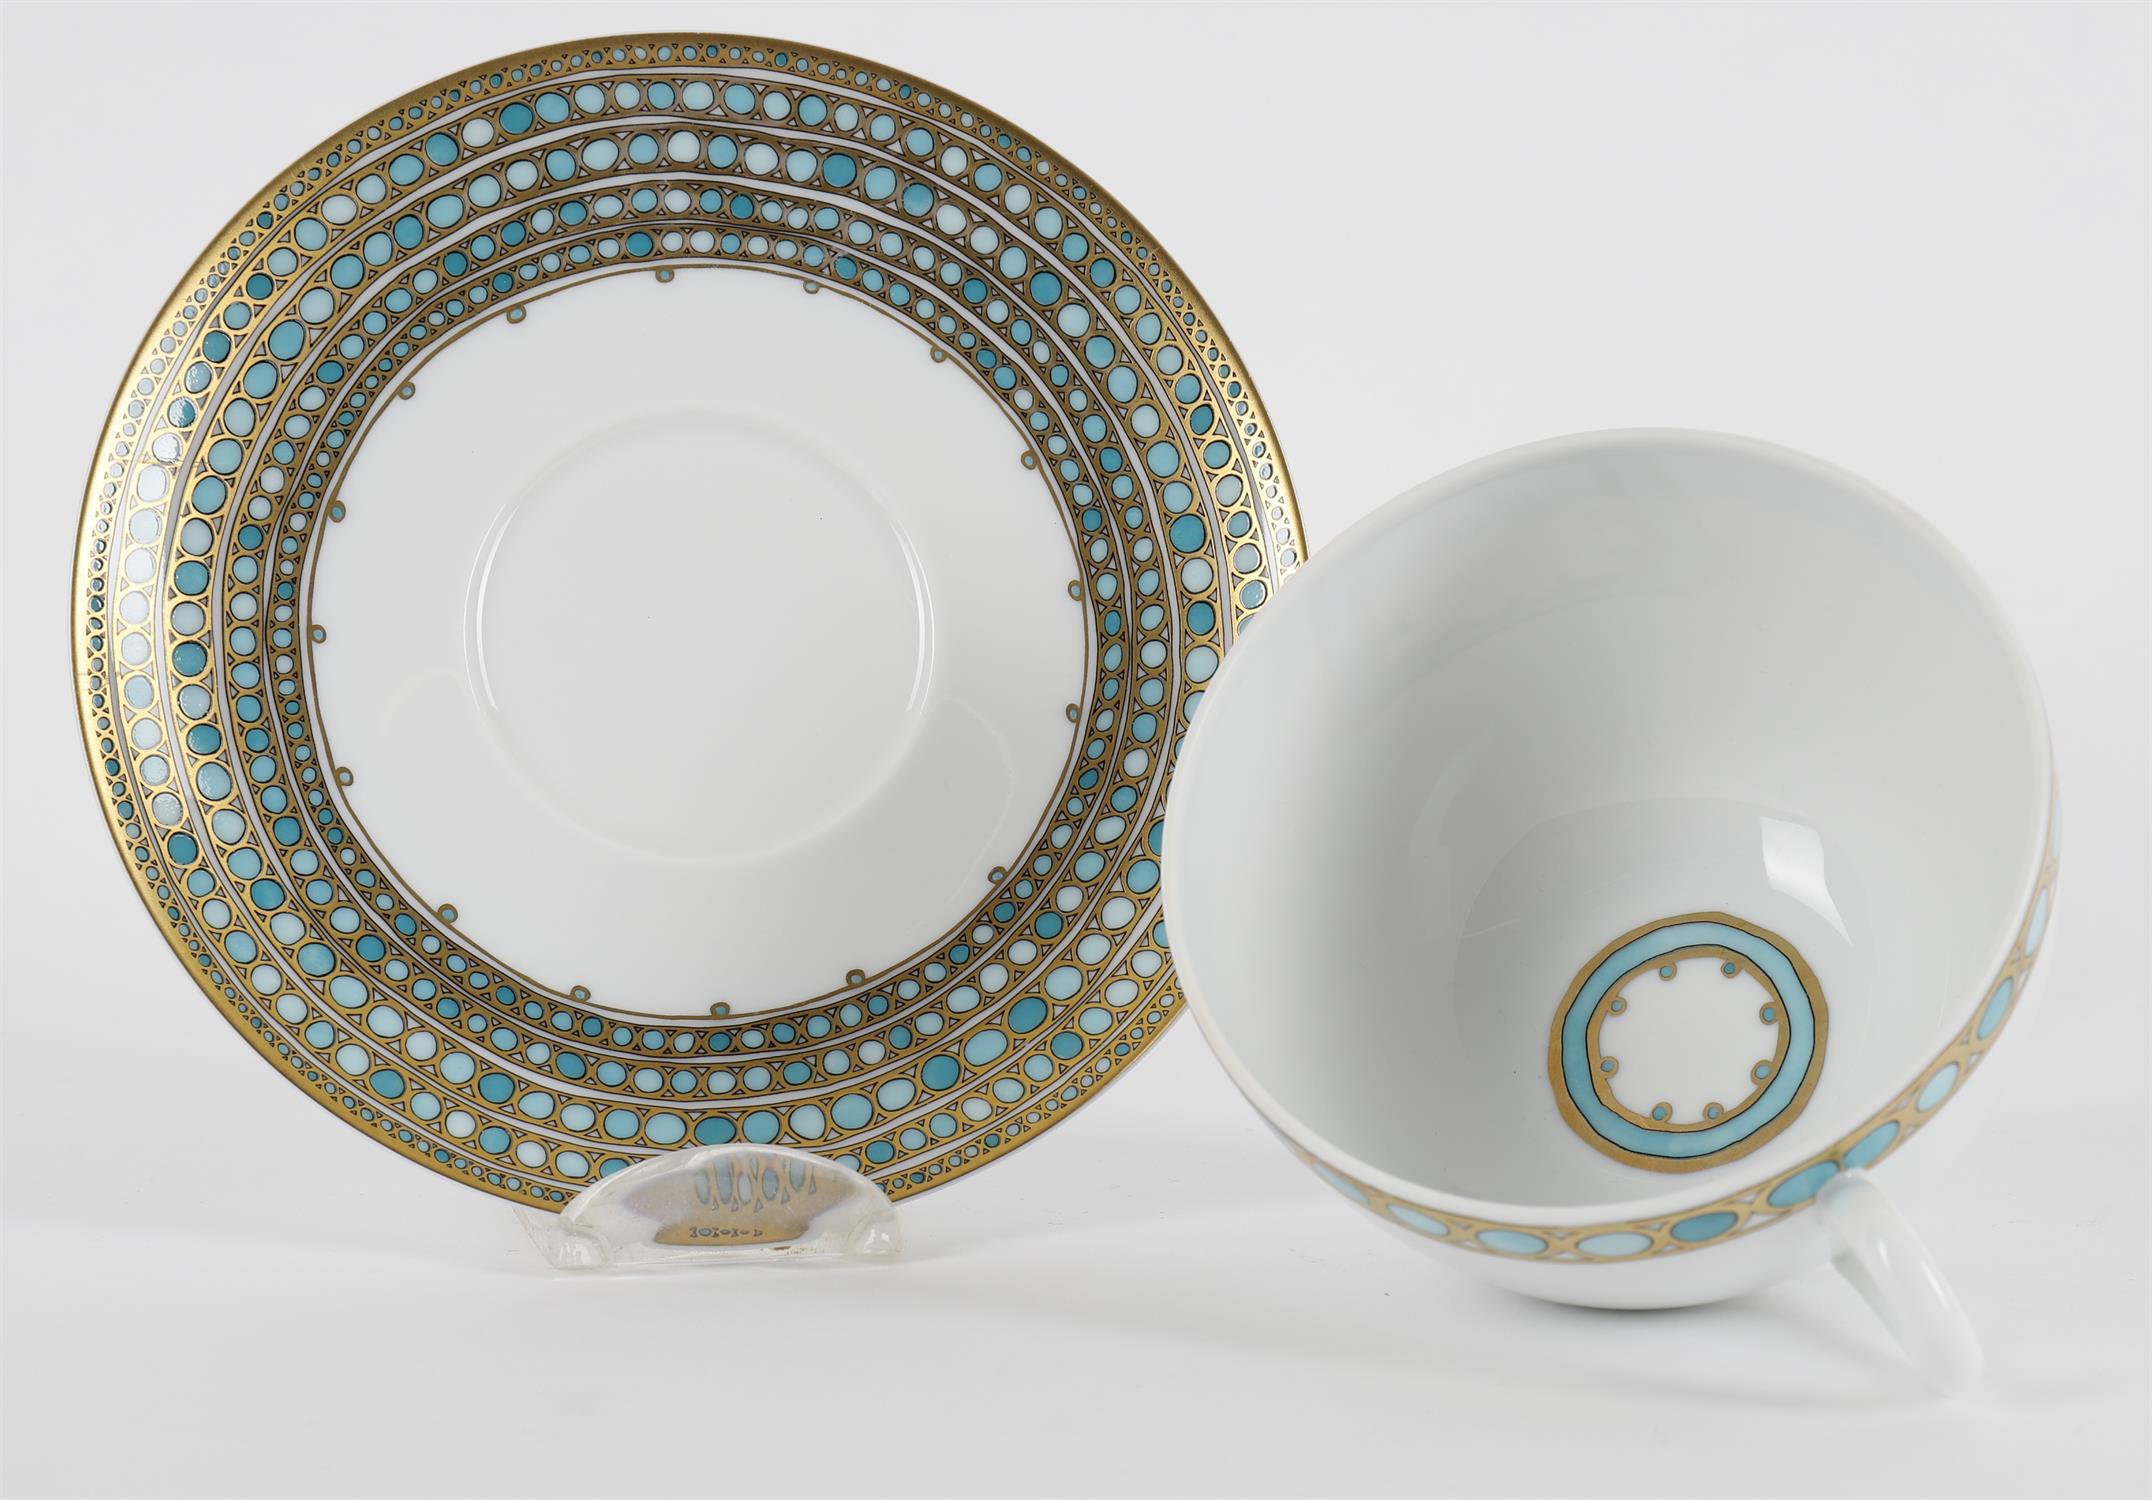 Six Haviland Limoges porcelain breakfast cups and saucers in the 'Syracuse' pattern - Image 4 of 4